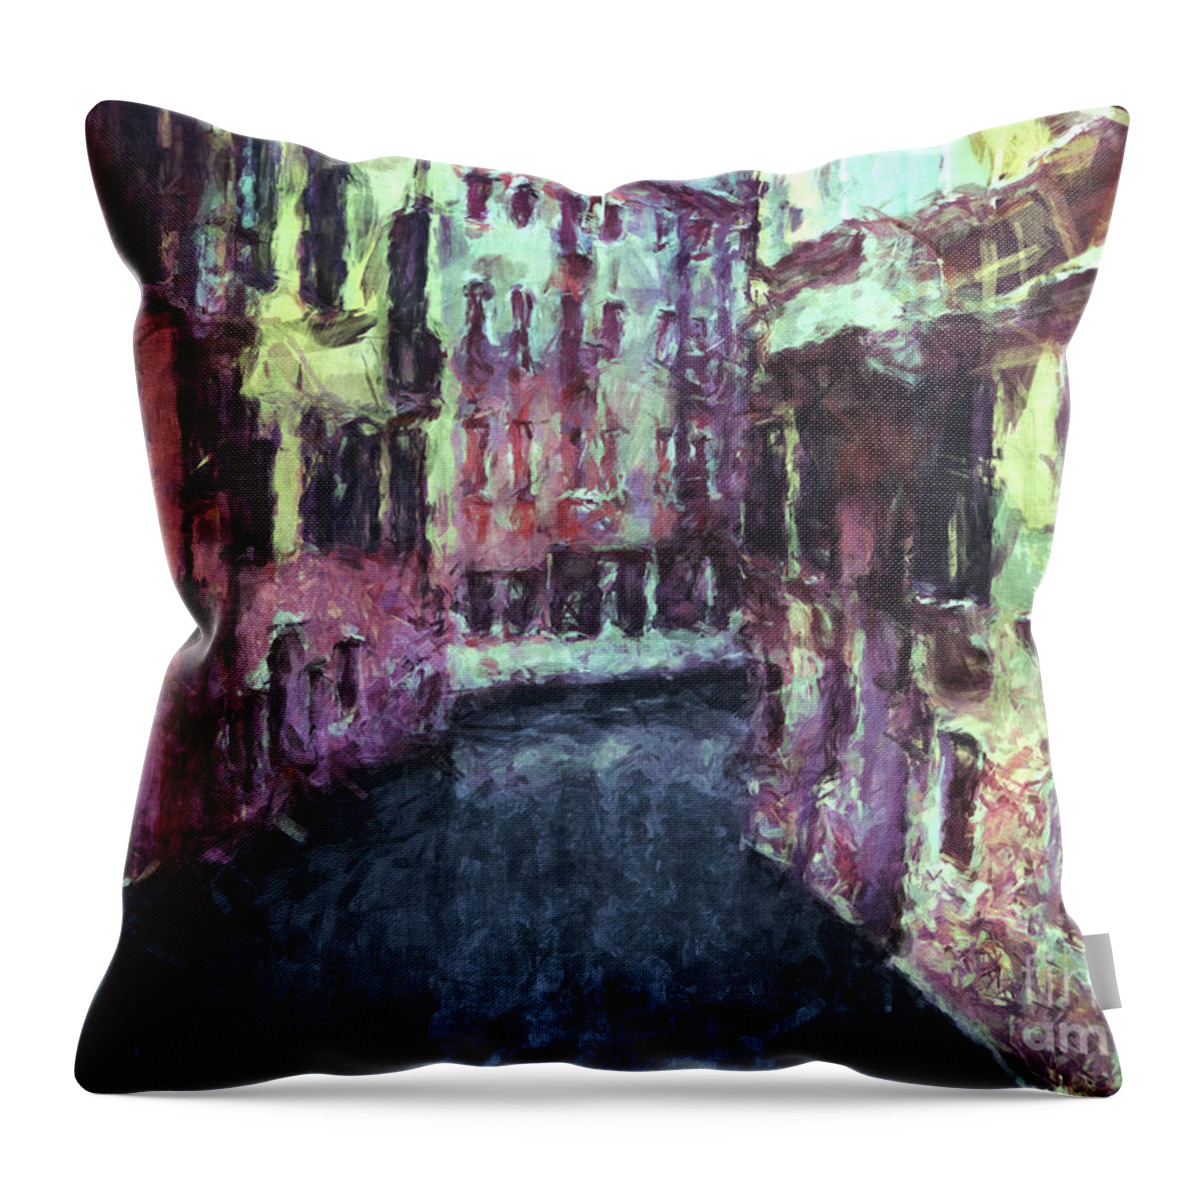 Venice Throw Pillow featuring the digital art Buildings Along A Venice Canal by Phil Perkins